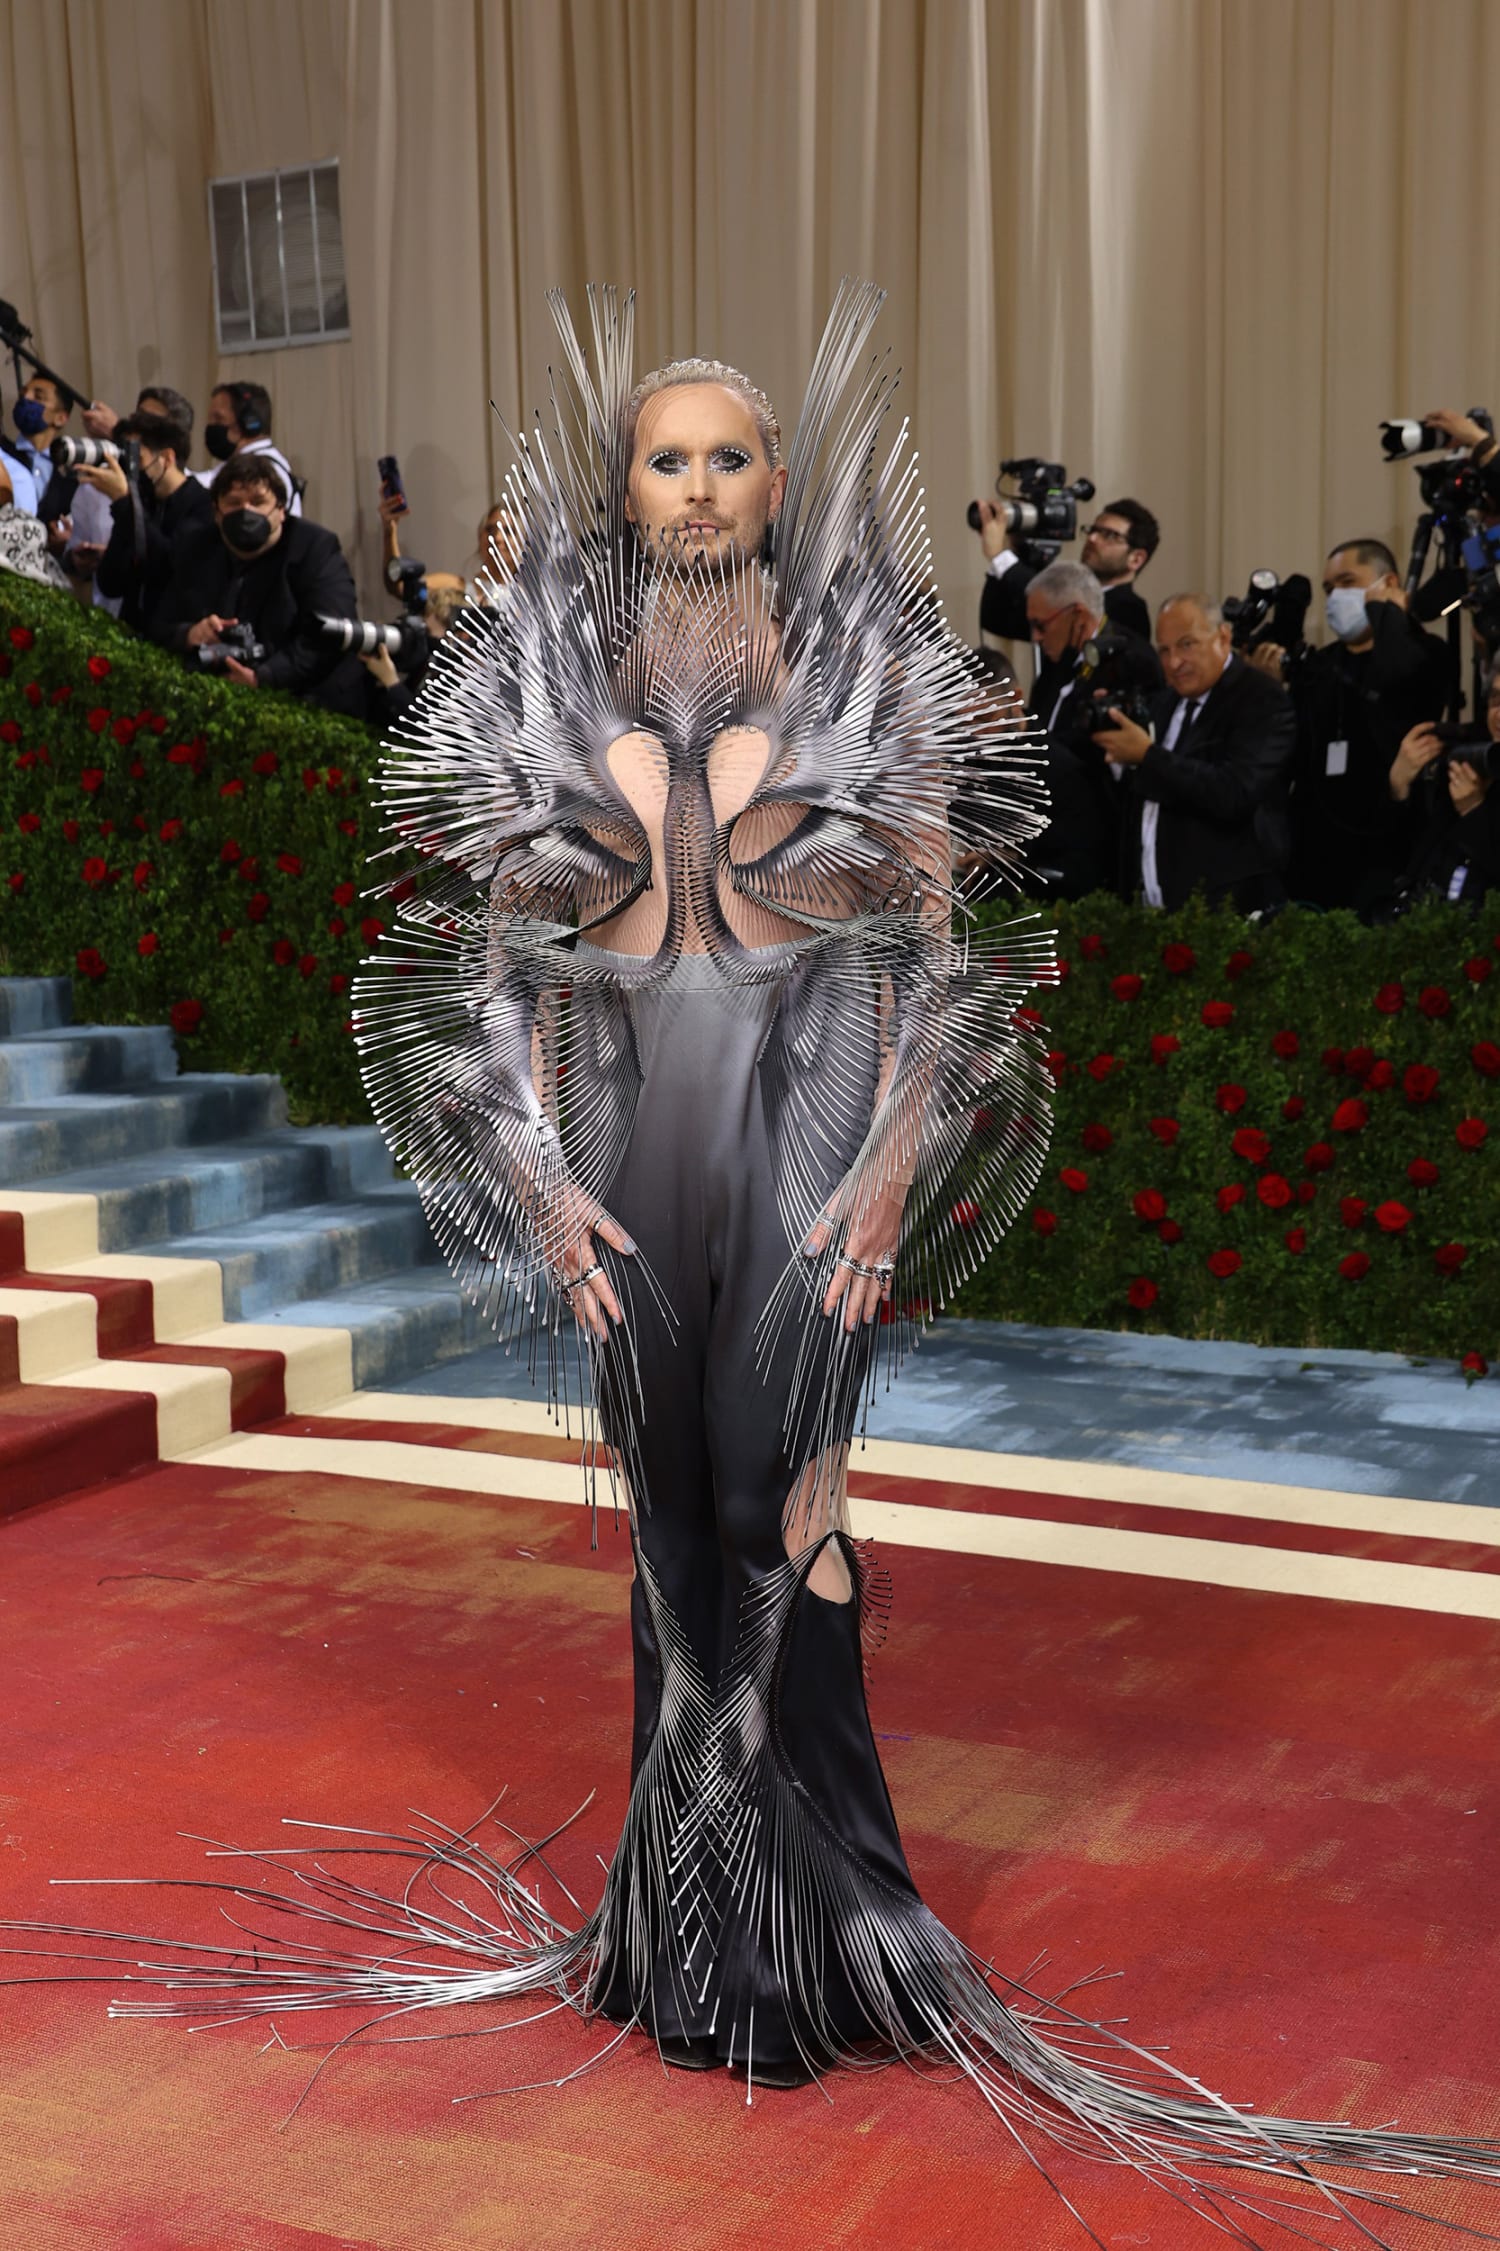 Met Gala 2022: the Wildest Looks Celebrities Wore on the Red Carpet